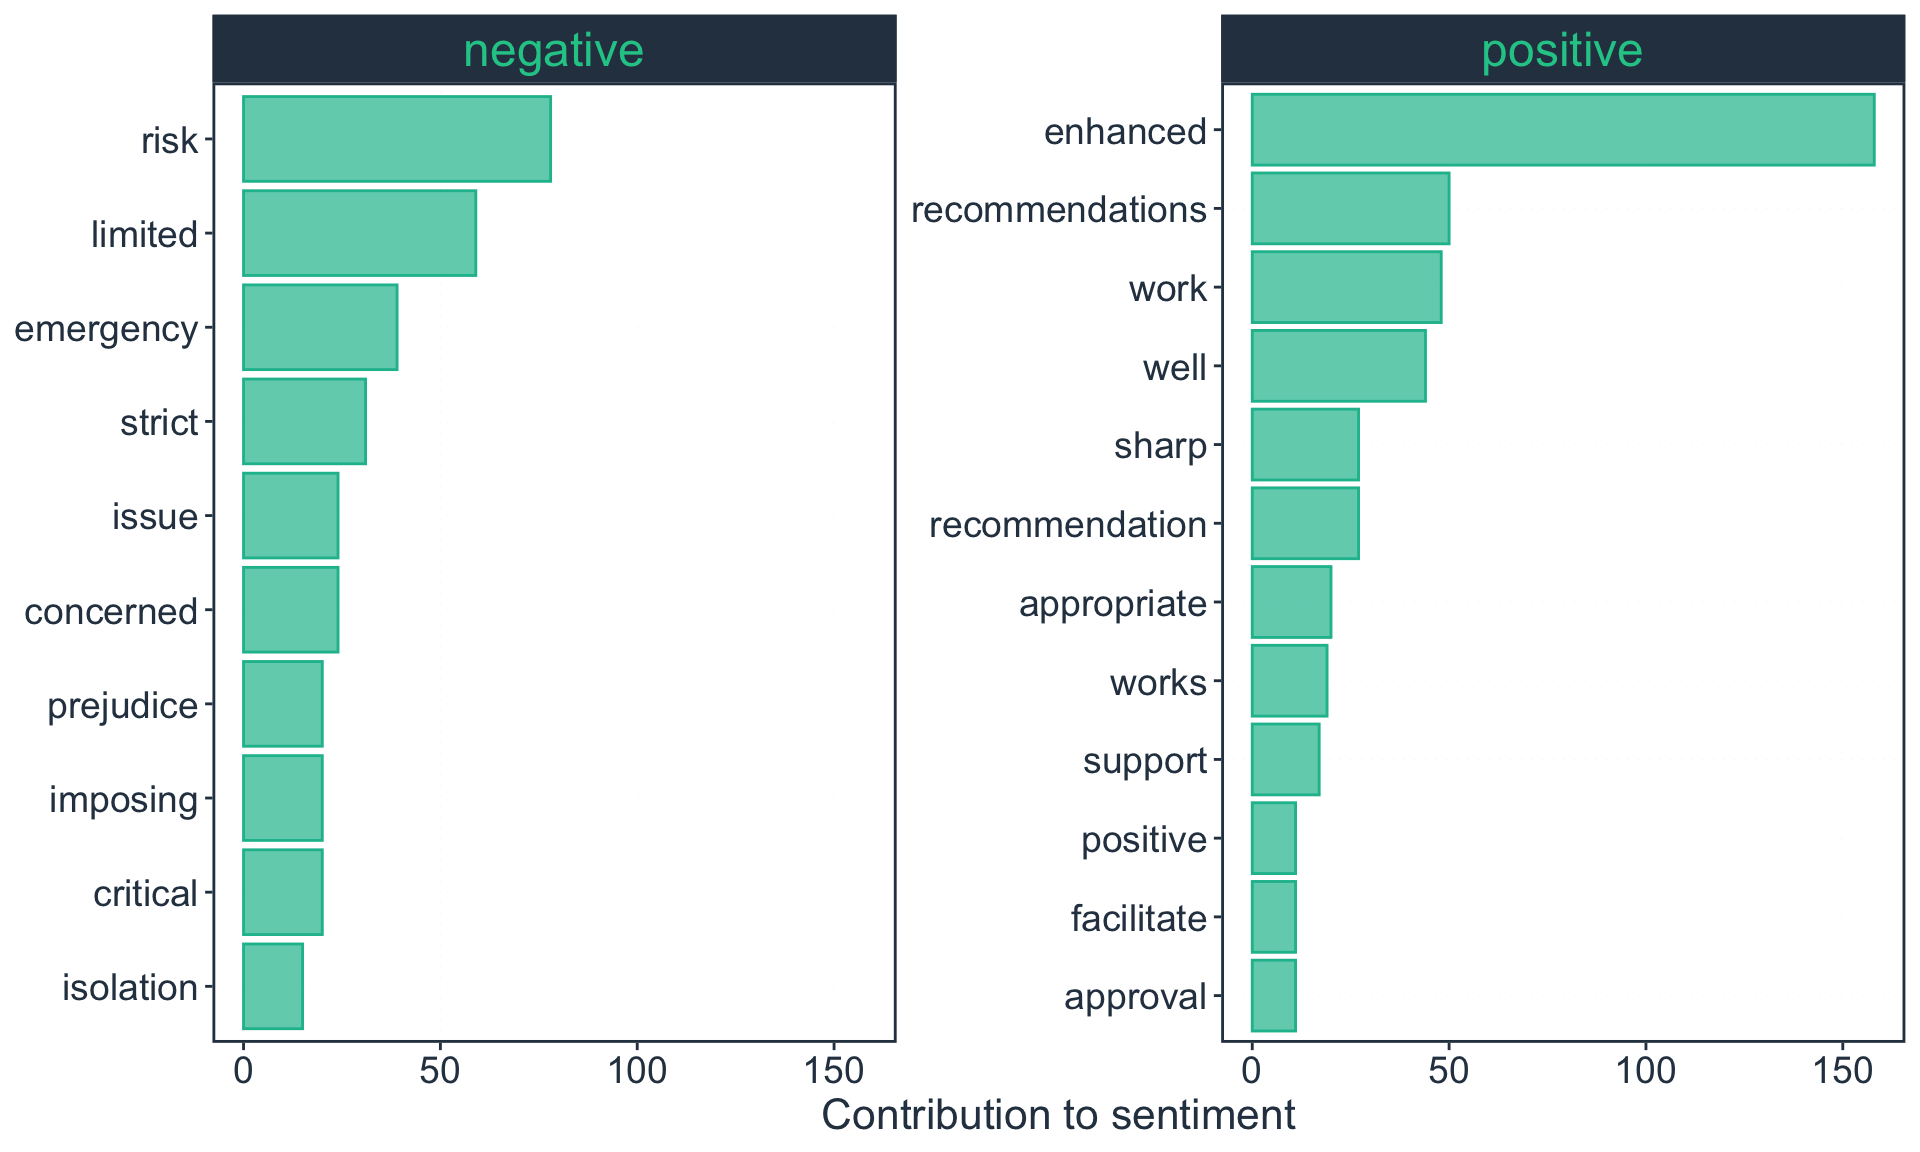 Top ten words that contribute to positive and negative sentiment